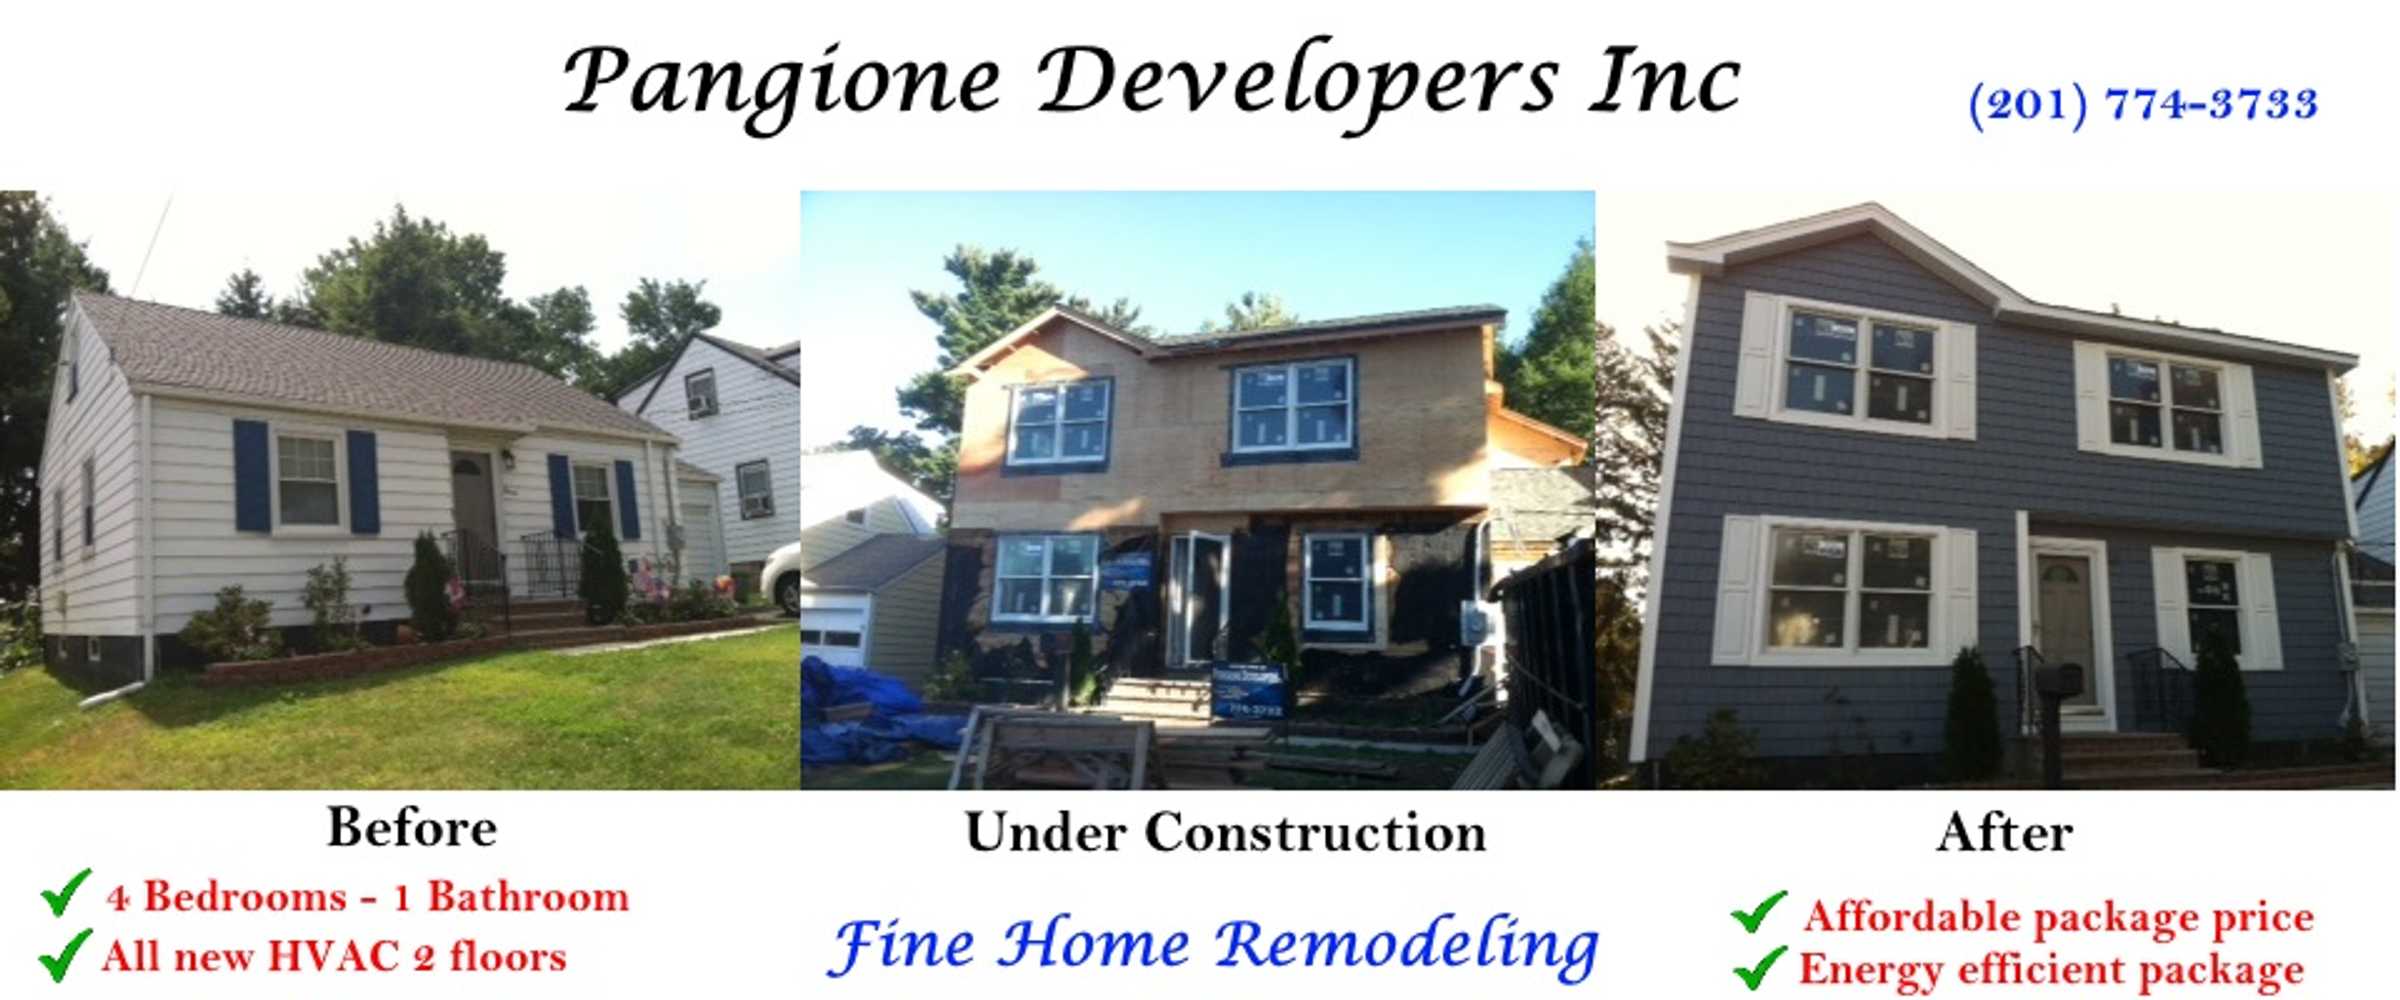 New Jersey Add a Level Contractors - Pangione Developers Inc